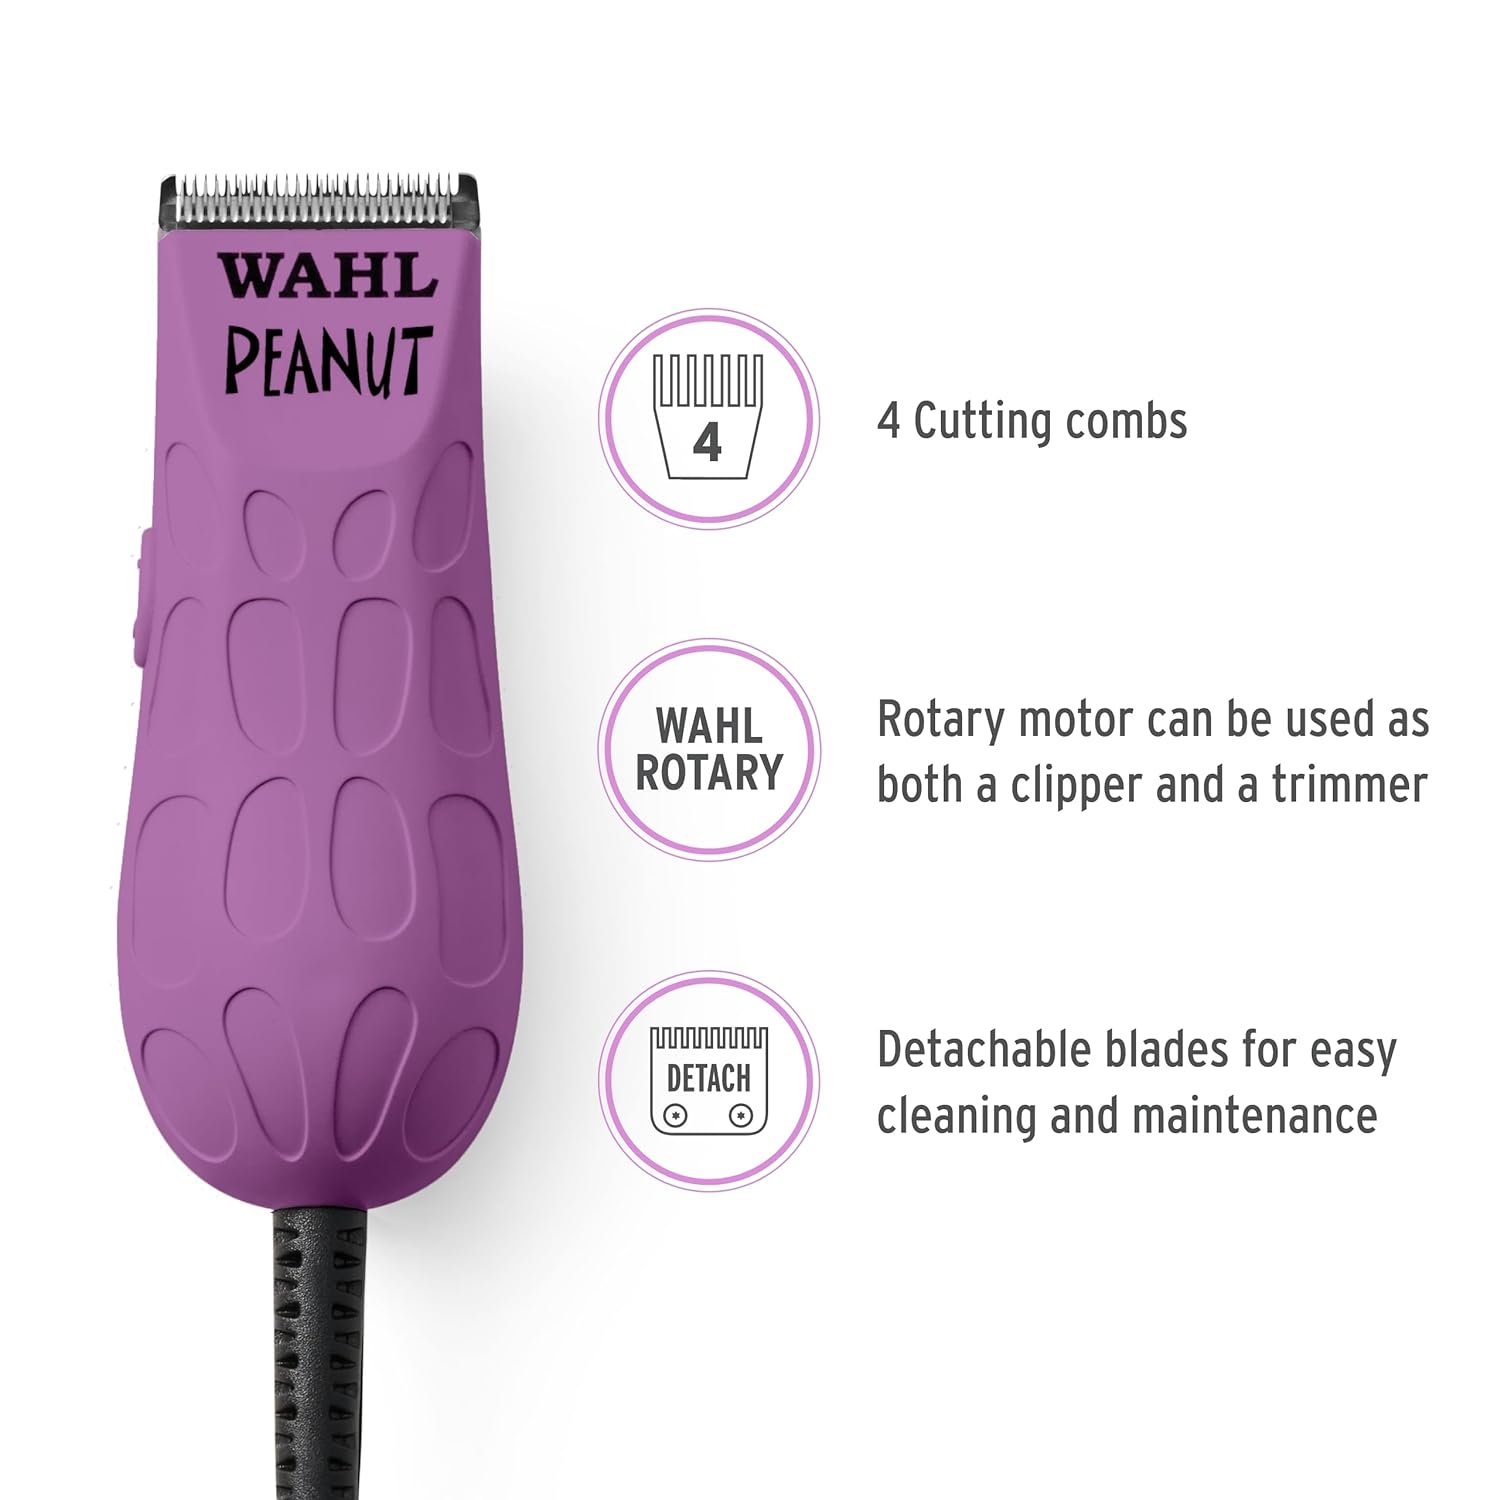 Wahl Professional - Peanut - Professional Beard Trimmer and Hair Clipper Kit - Adjustable Hair Cutting Tool with 4 Guide Combs - Orchid\/Black